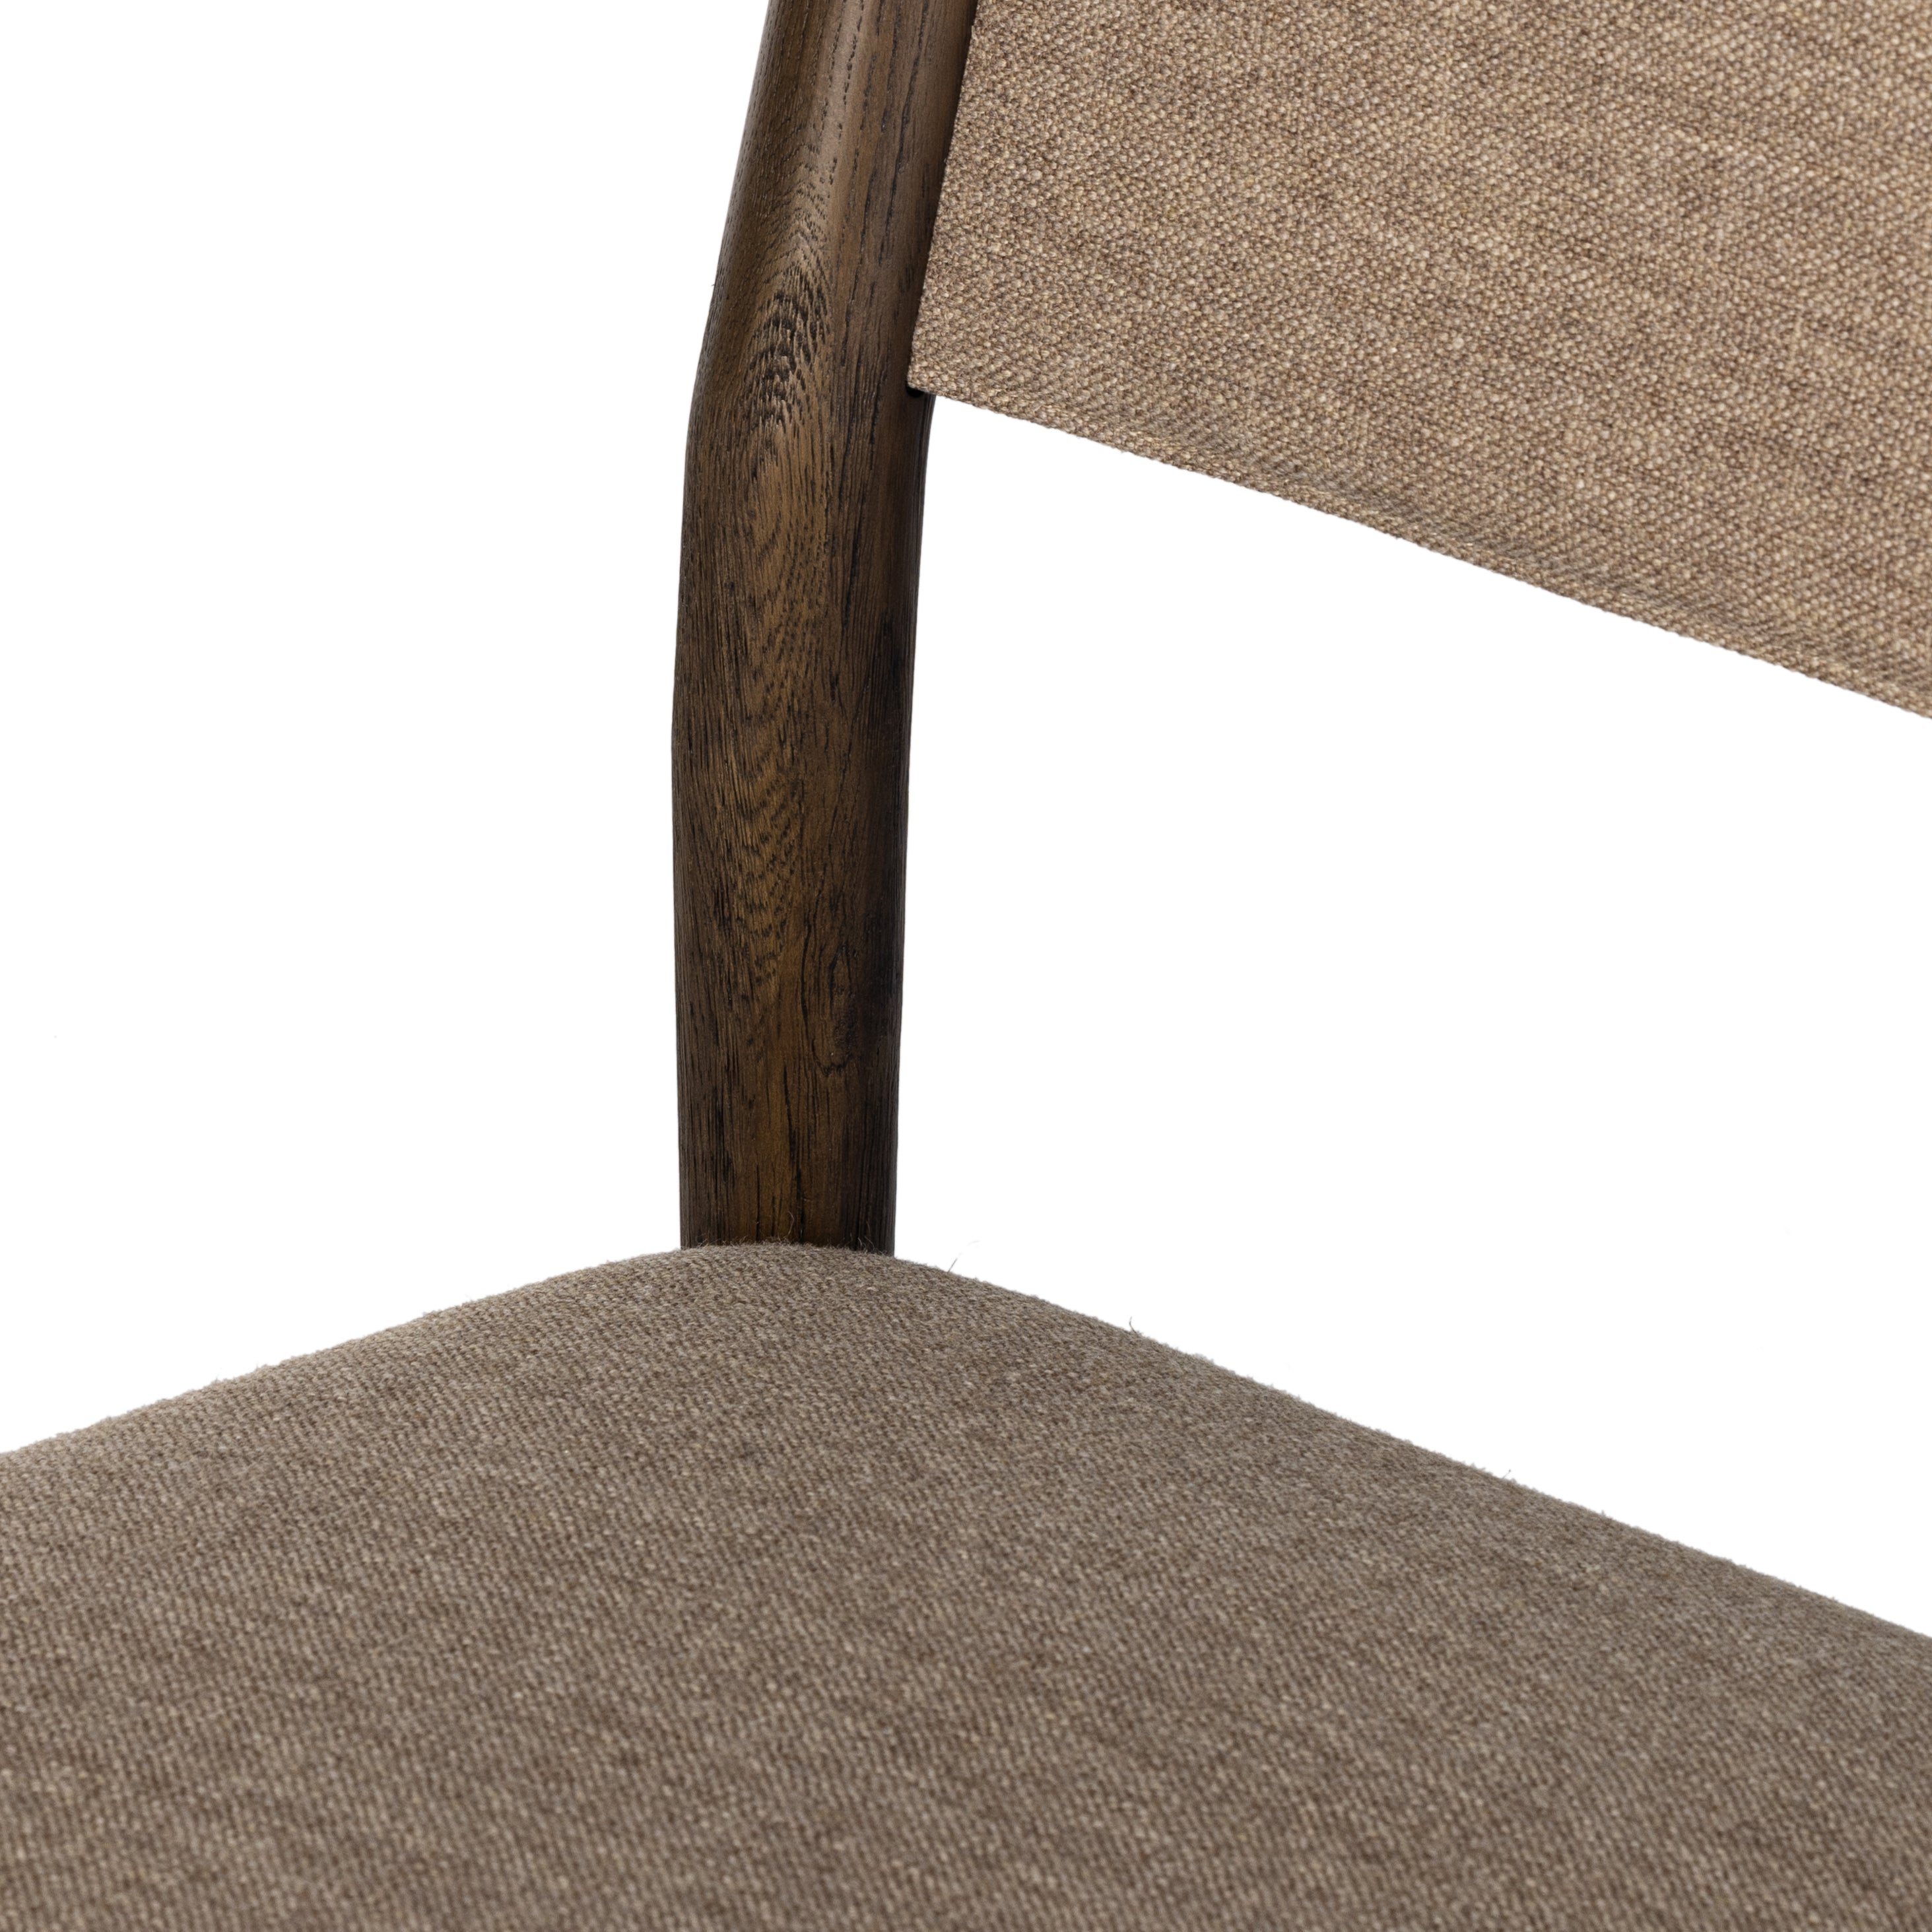 Mixed materials place a modern twist on the sling-back dining chair. A solid oak frame forms rounded dowel legs for a touch of traditionalism, with performance fabric perfect for everyday dining. Amethyst Home provides interior design, new construction, custom furniture and area rugs in the Laguna Beach metro area